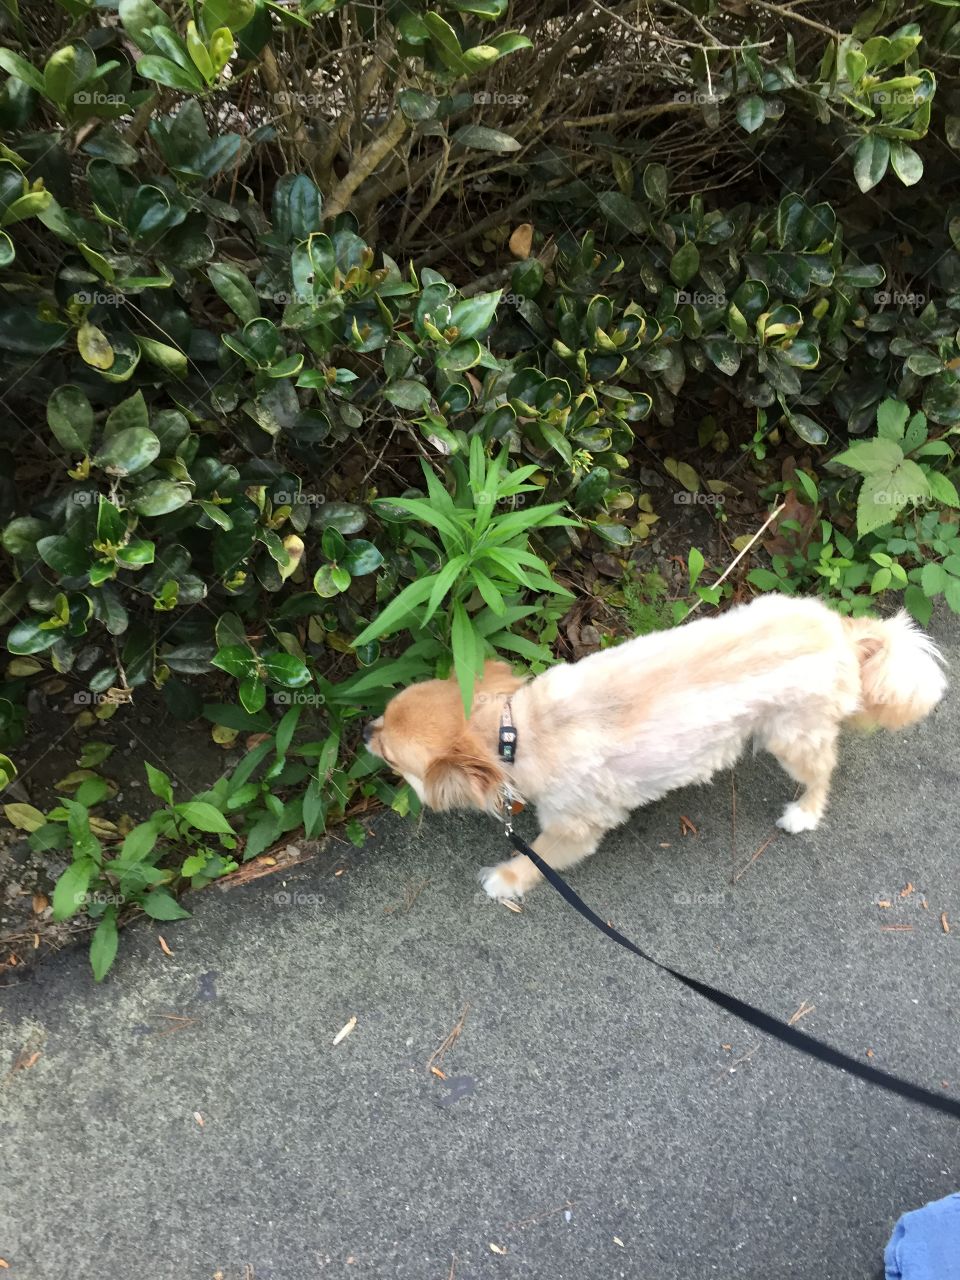 Chihuahua on weed!. Took this pic of my baby's new haircut and had it pointed out to me that the grass around her looked like pot..ha!